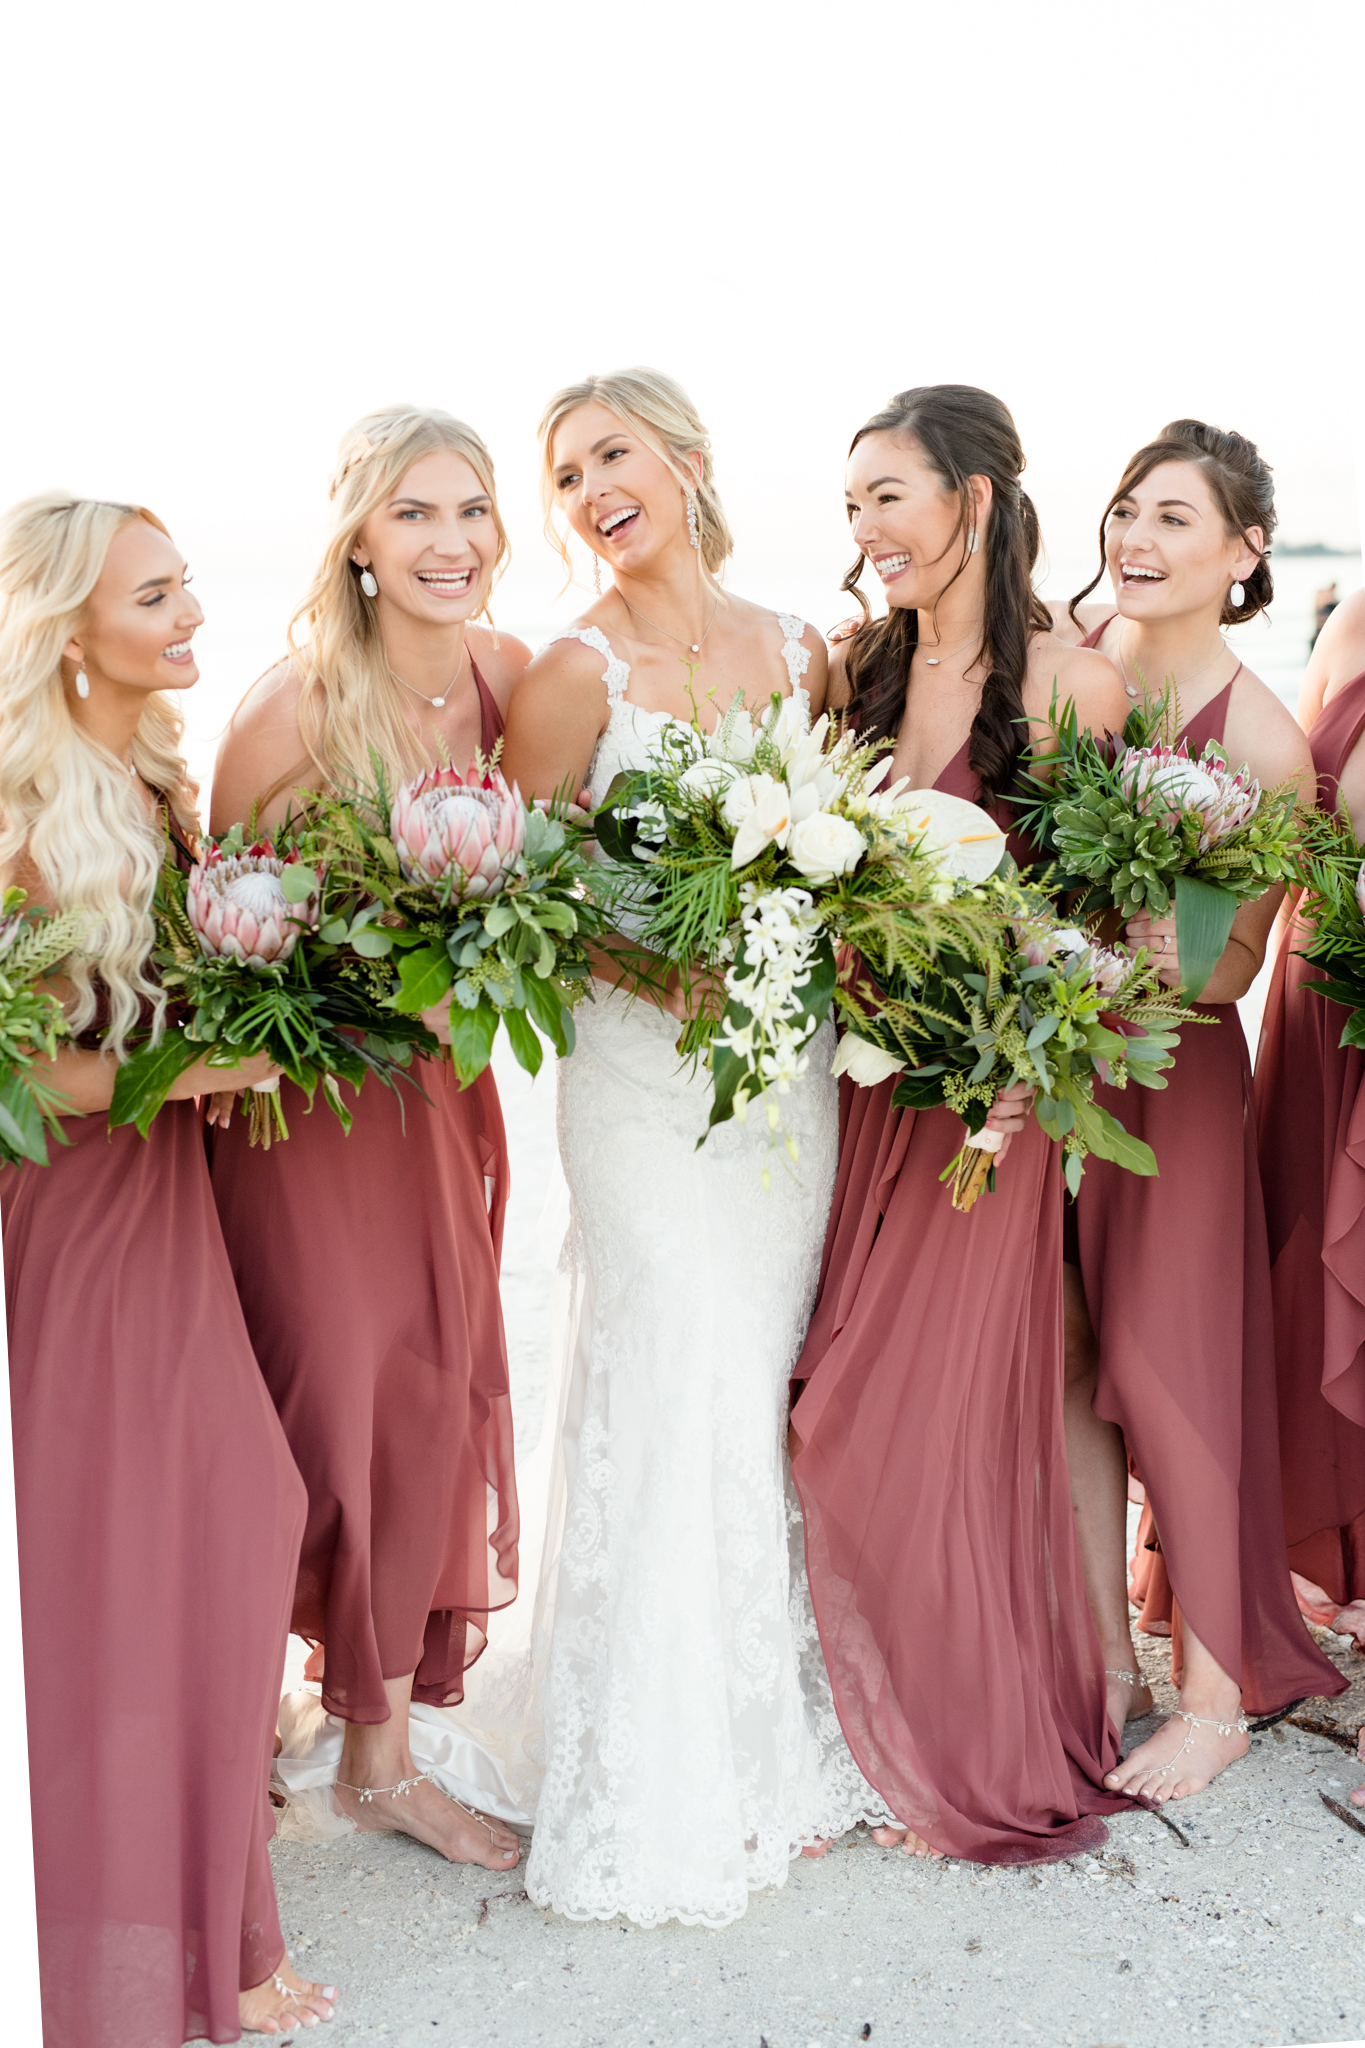 Bride and bridesmaids laugh together at sunset.